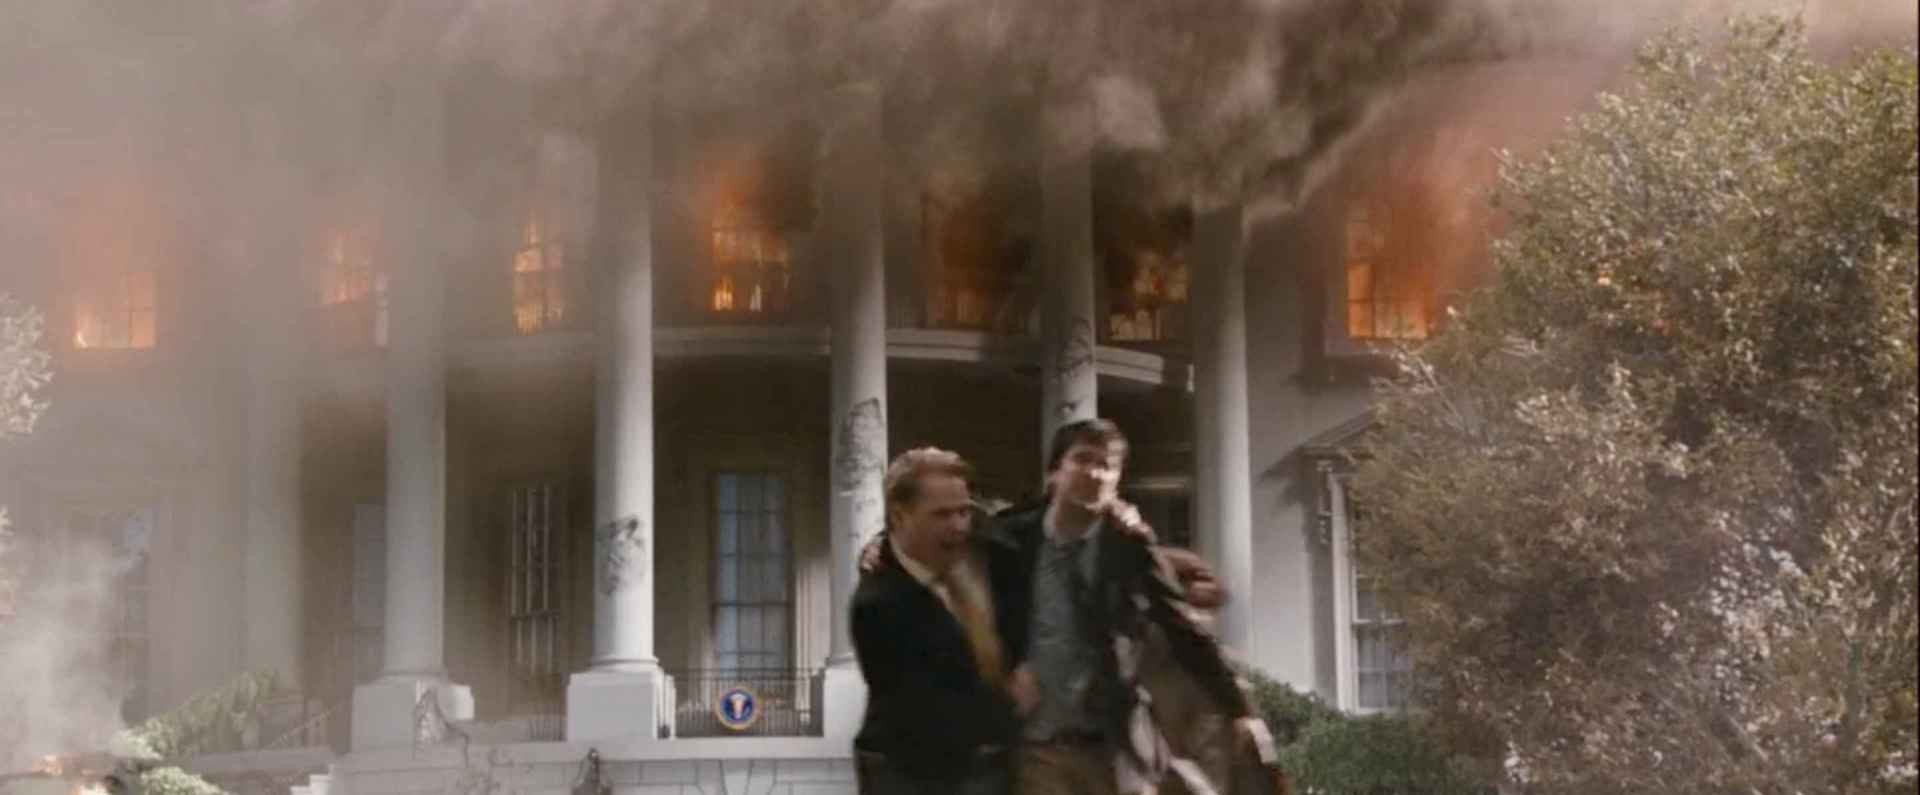 White House Down (2013) Civilians and staff flee the burning whitehouse